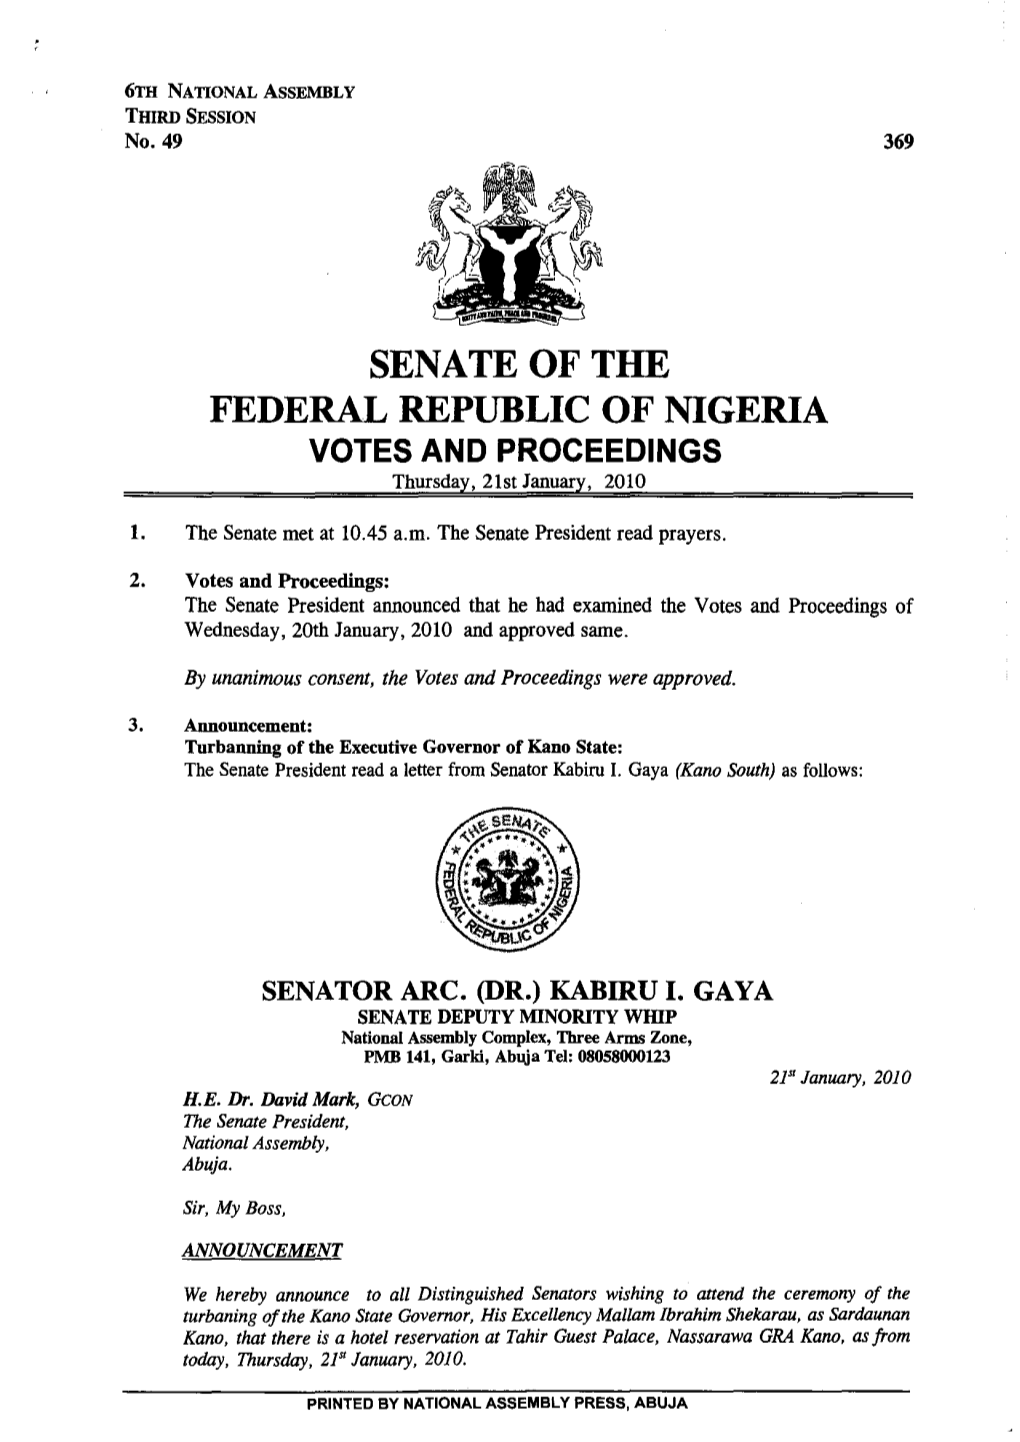 SENATE of the FEDERAL REPUBLIC of NIGERIA VOTES and PROCEEDINGS Thursday, 21St January, 2010